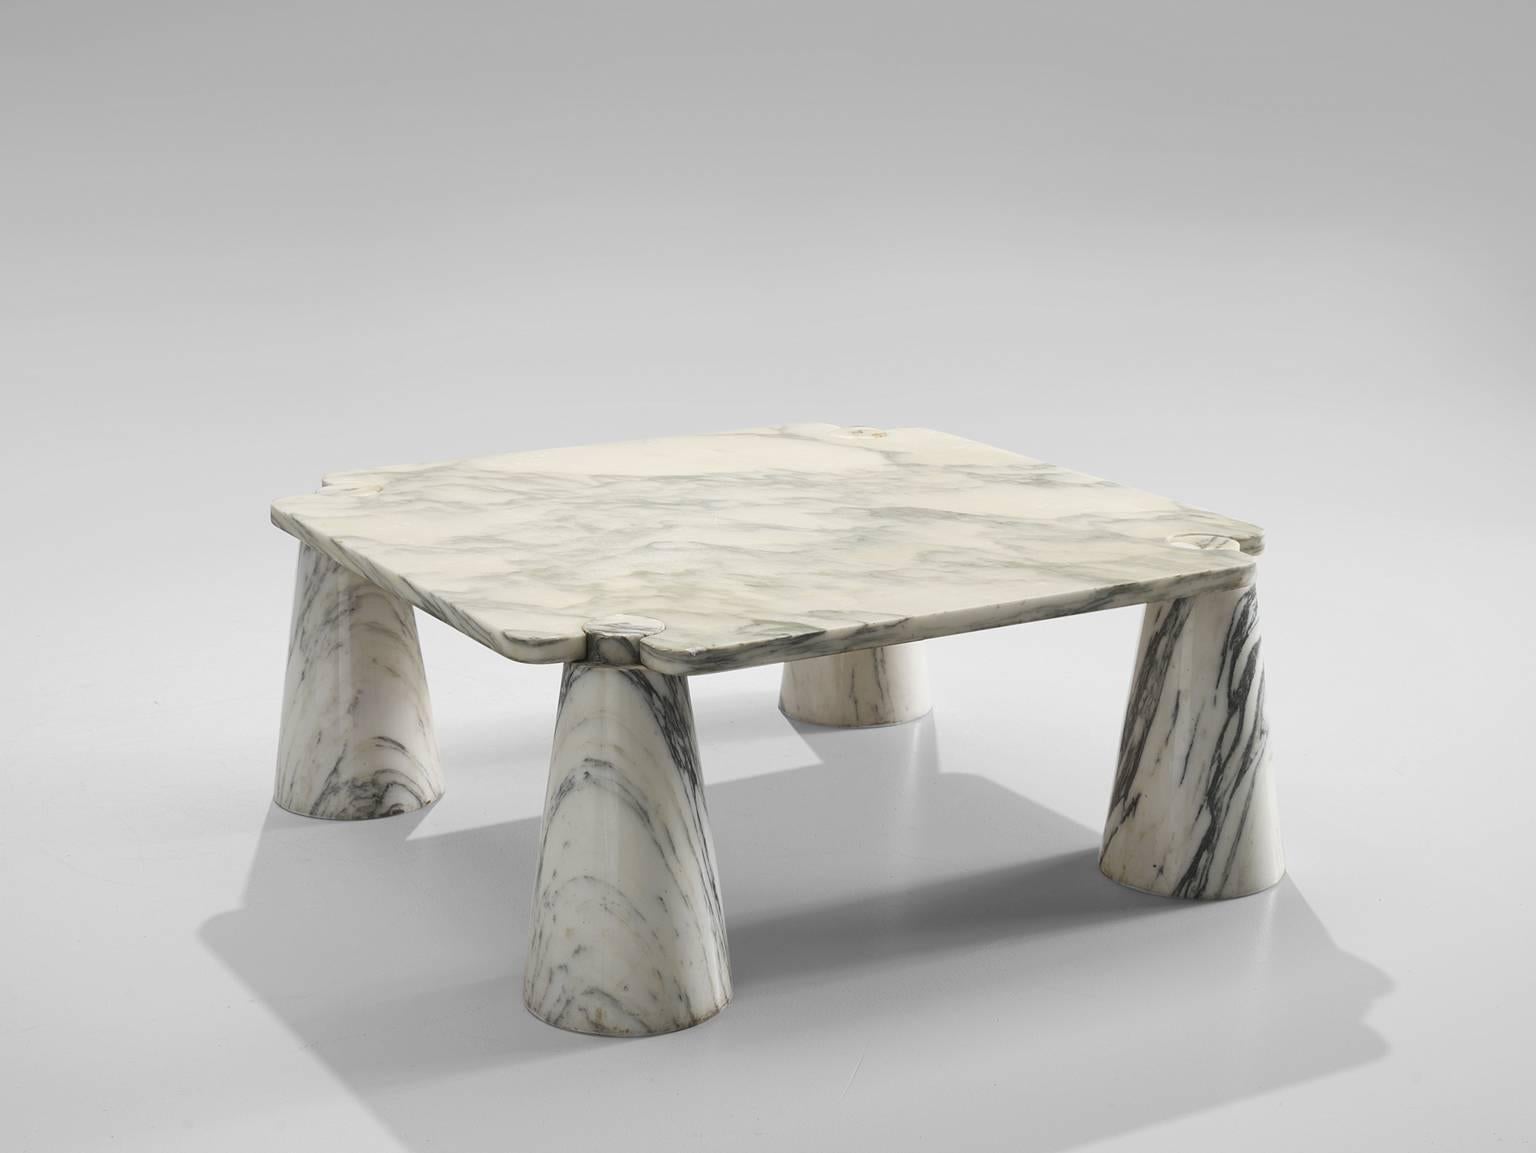 Cocktail table by Angelo Mangiarotti, marble, 1970s. 

This sculptural table by Angelo Mangiarotti is a skillful example of postmodern design. The square table features no joints or clamps and is architectural in its structure. The table rests on